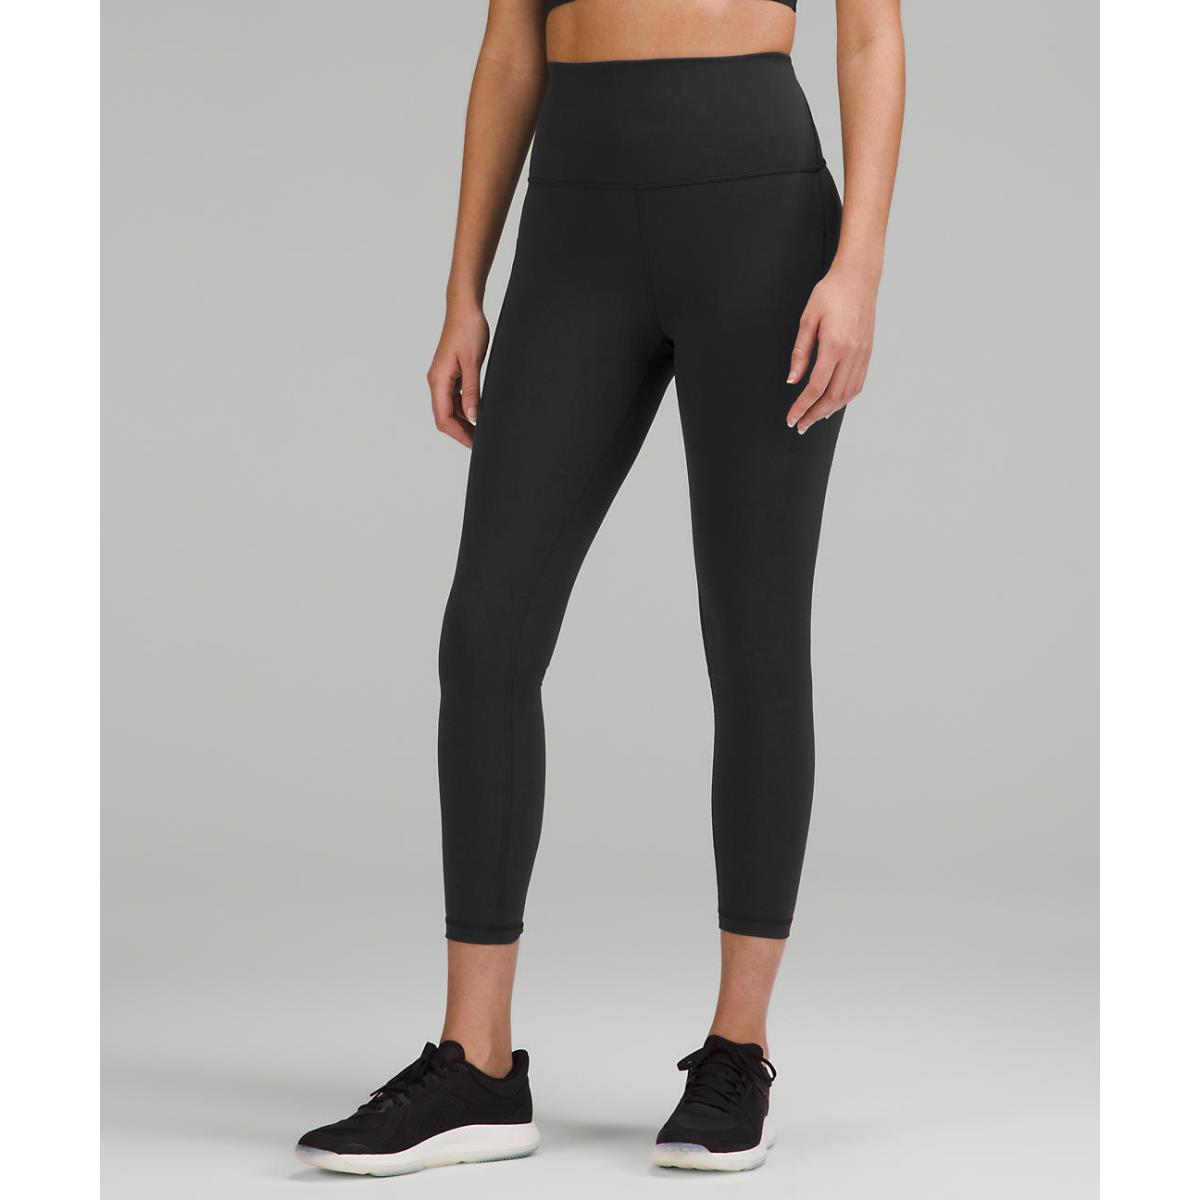 Lululemon Wunder Train HR Tight with Pockets 25 - Retail